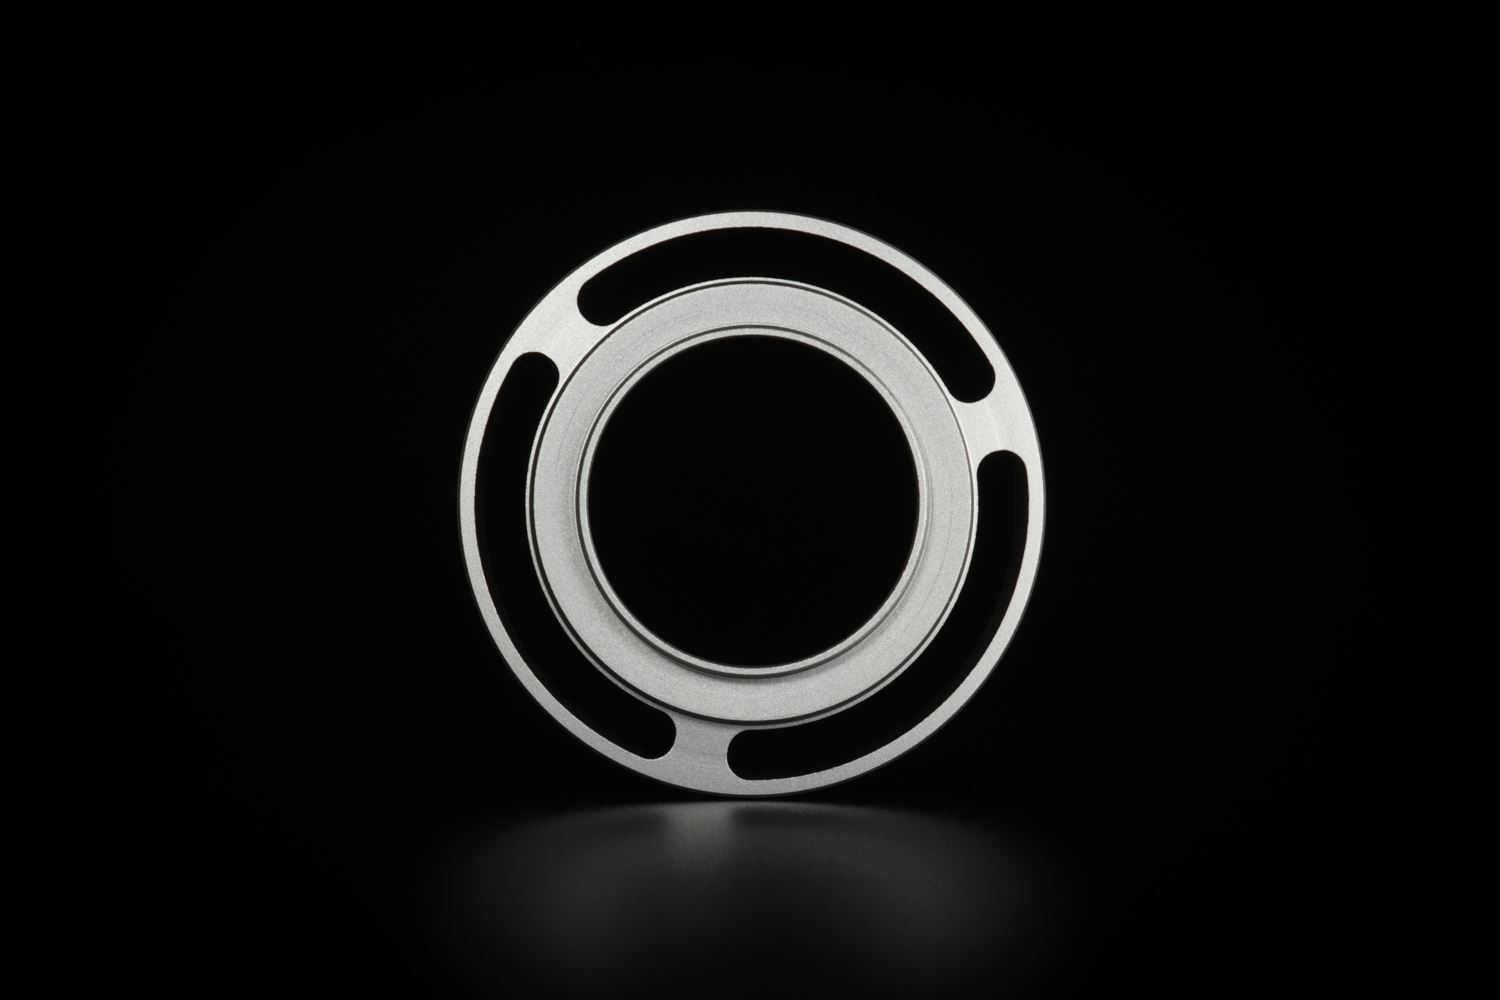 Picture of Silver Ventilated Lens Hood made for Leica E39 lenses